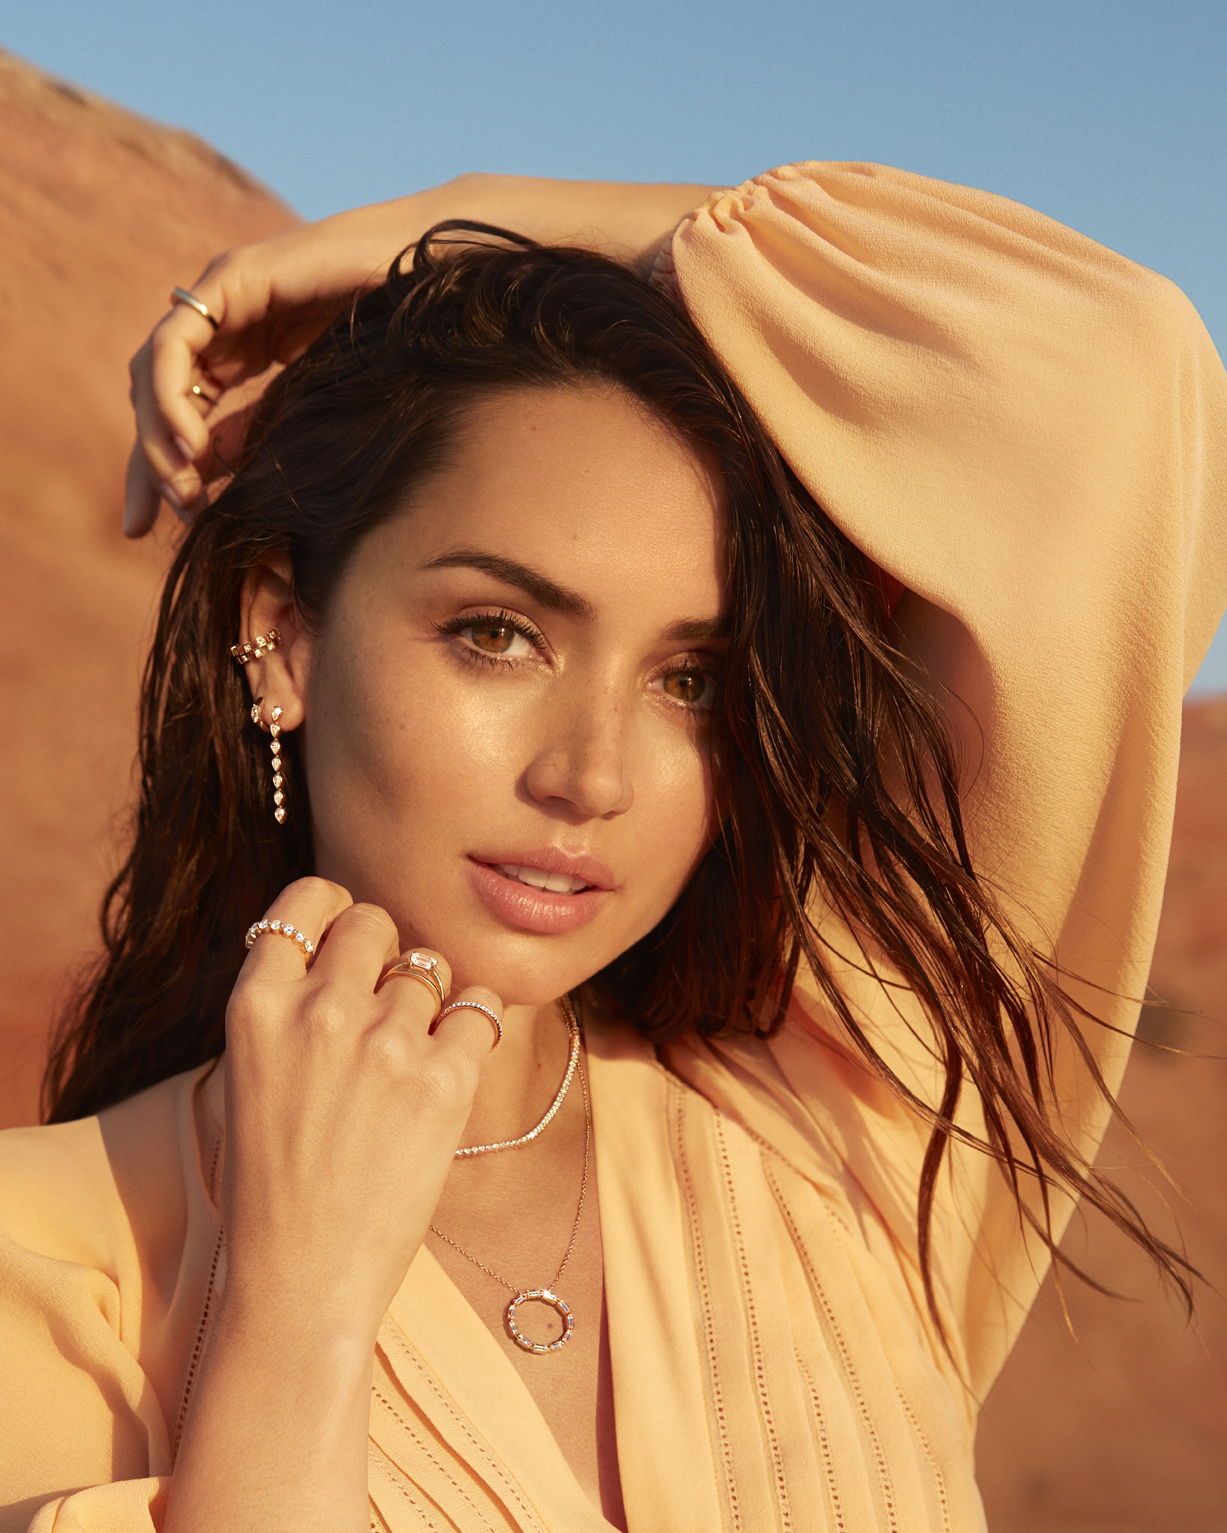 Ana de Armas in "For Moments Like No Other" campaign as a new Global Ambassador of Only Natural Diamonds